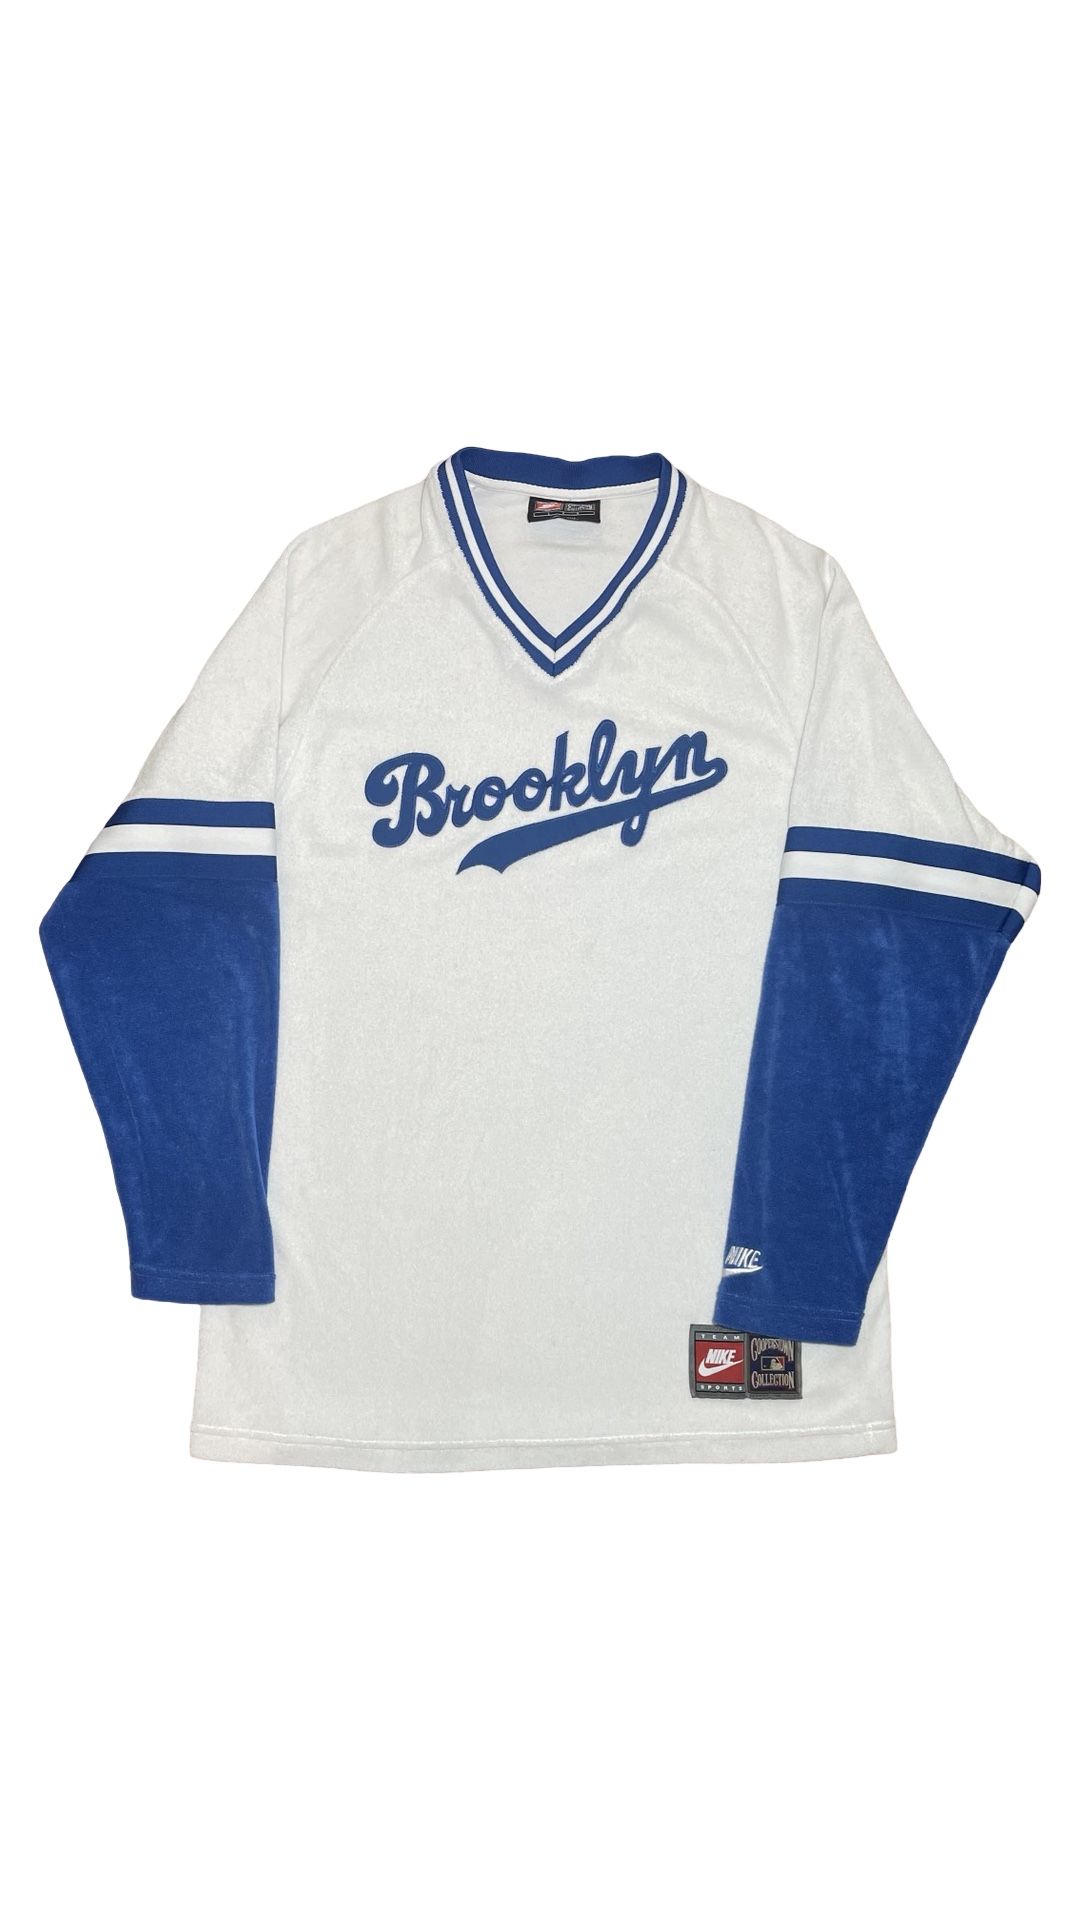 Vintage Nike Cooperstown Collection MLB Brooklyn Los Angeles Dodgers Fleece Pullover Long Sleeve Jersey Shirt